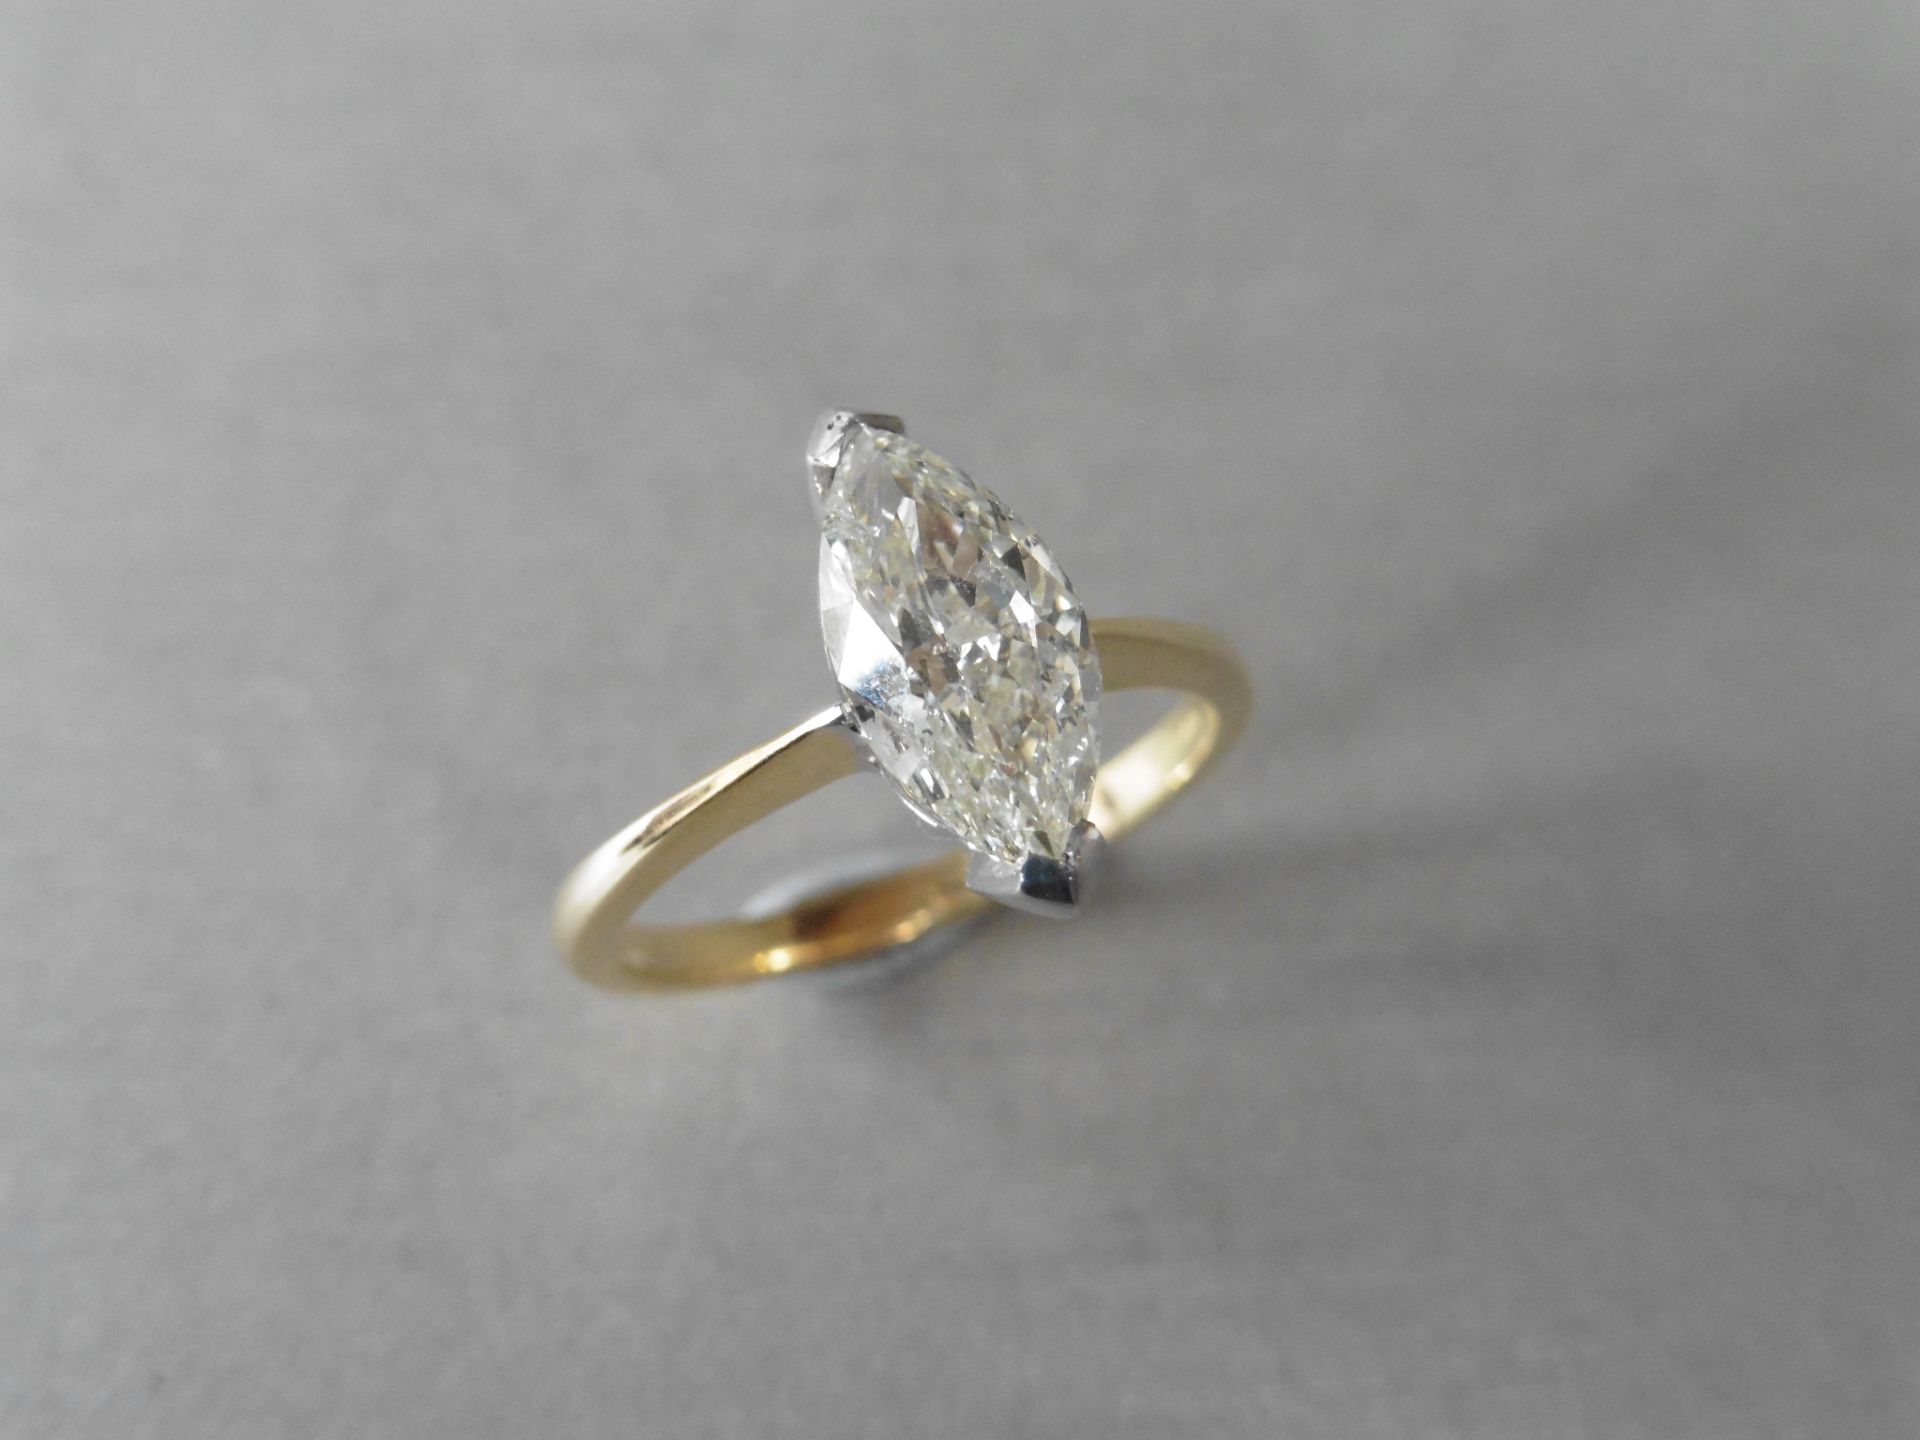 1.51ct marquise cut diamond ring. H colour and Si2 clarity. Secured in a 2 claw white gold setting